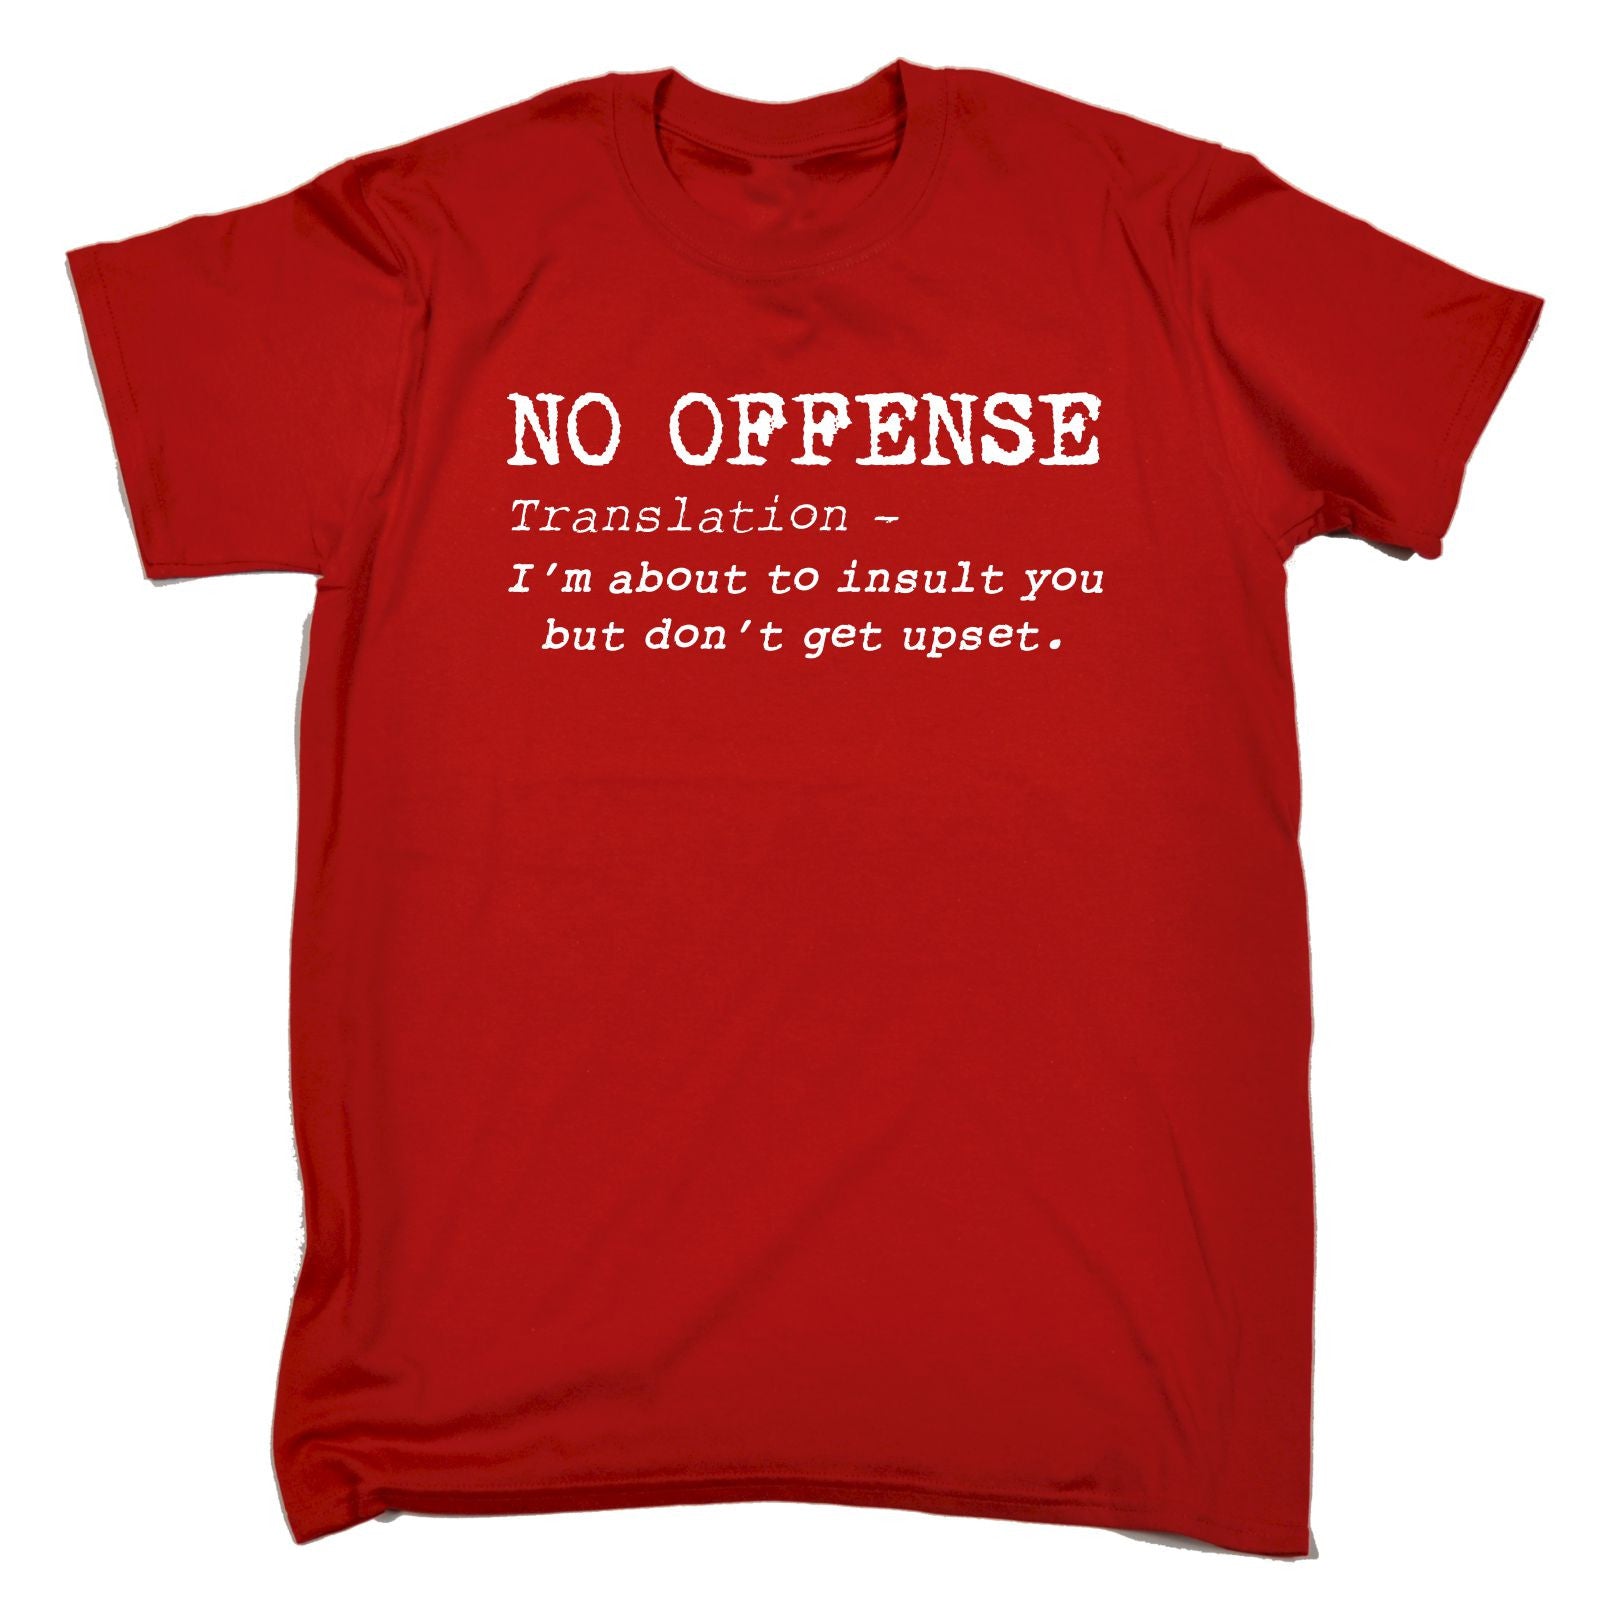 No Offense T Shirt Funny Offensive Birthday Present Tee Top Joke Funny